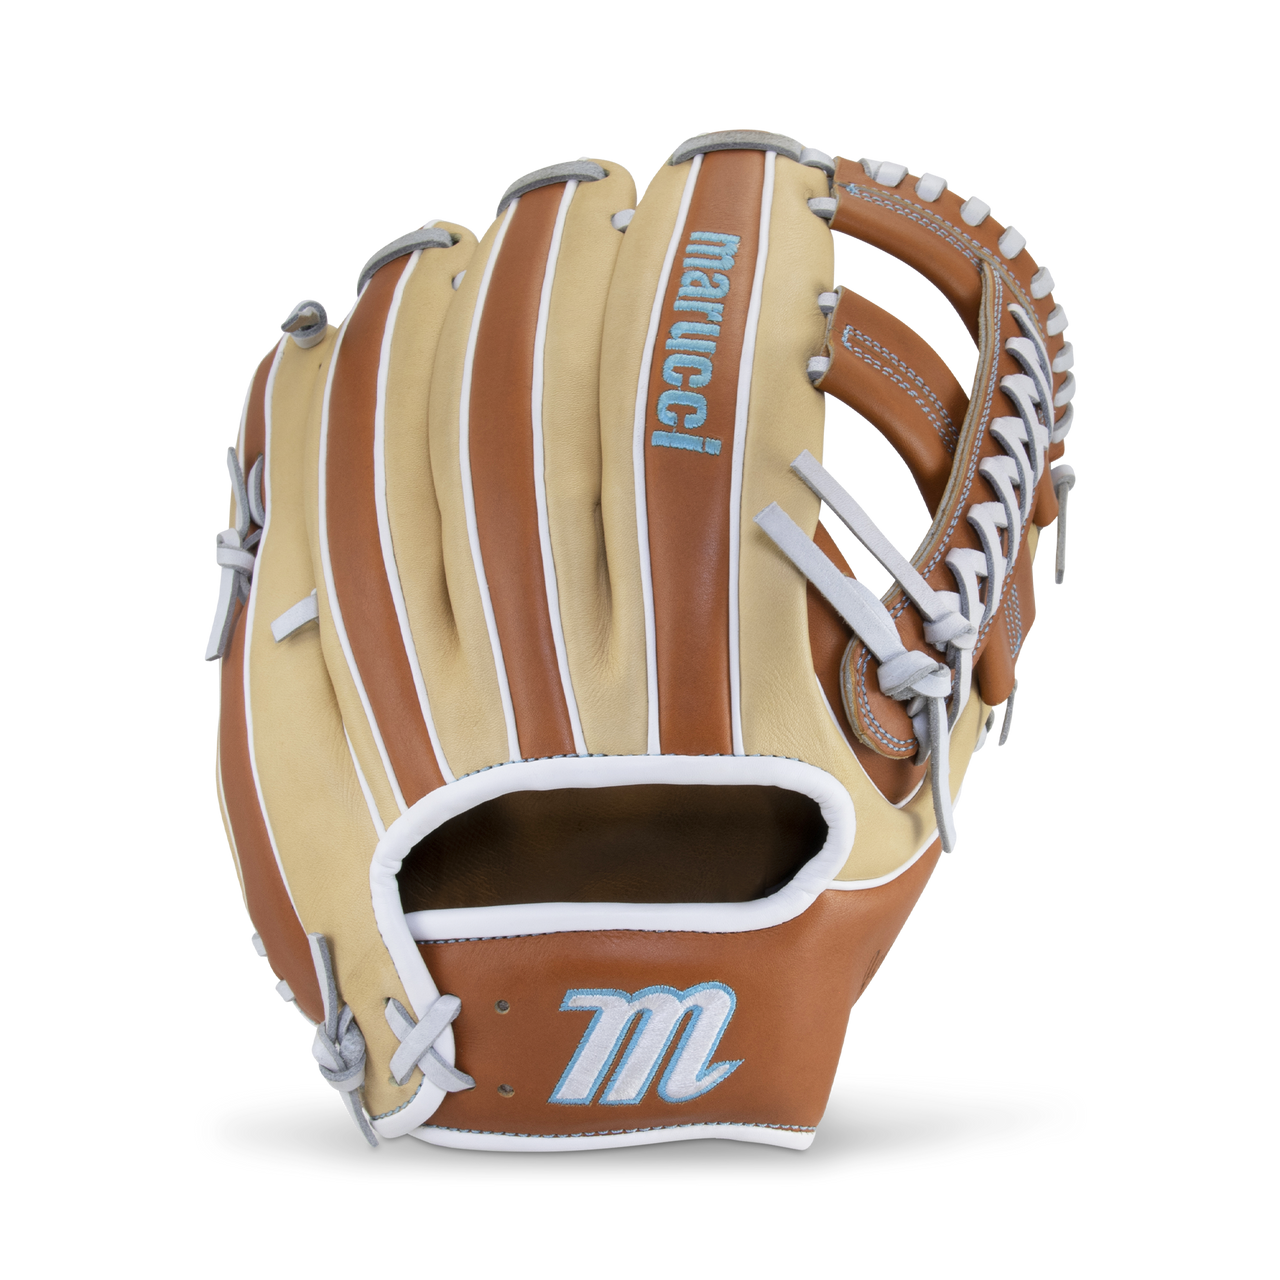 marucci-acadia-fastpitch-softball-glove-45a5-12-inch-braided-post-right-hand-throw MFGACFP45A5-CMCB-RightHandThrow Marucci  <p><span style=font-size large;>The ACADIA FASTPITCH M TYPE 45A5FP 12 BRAIDED POST